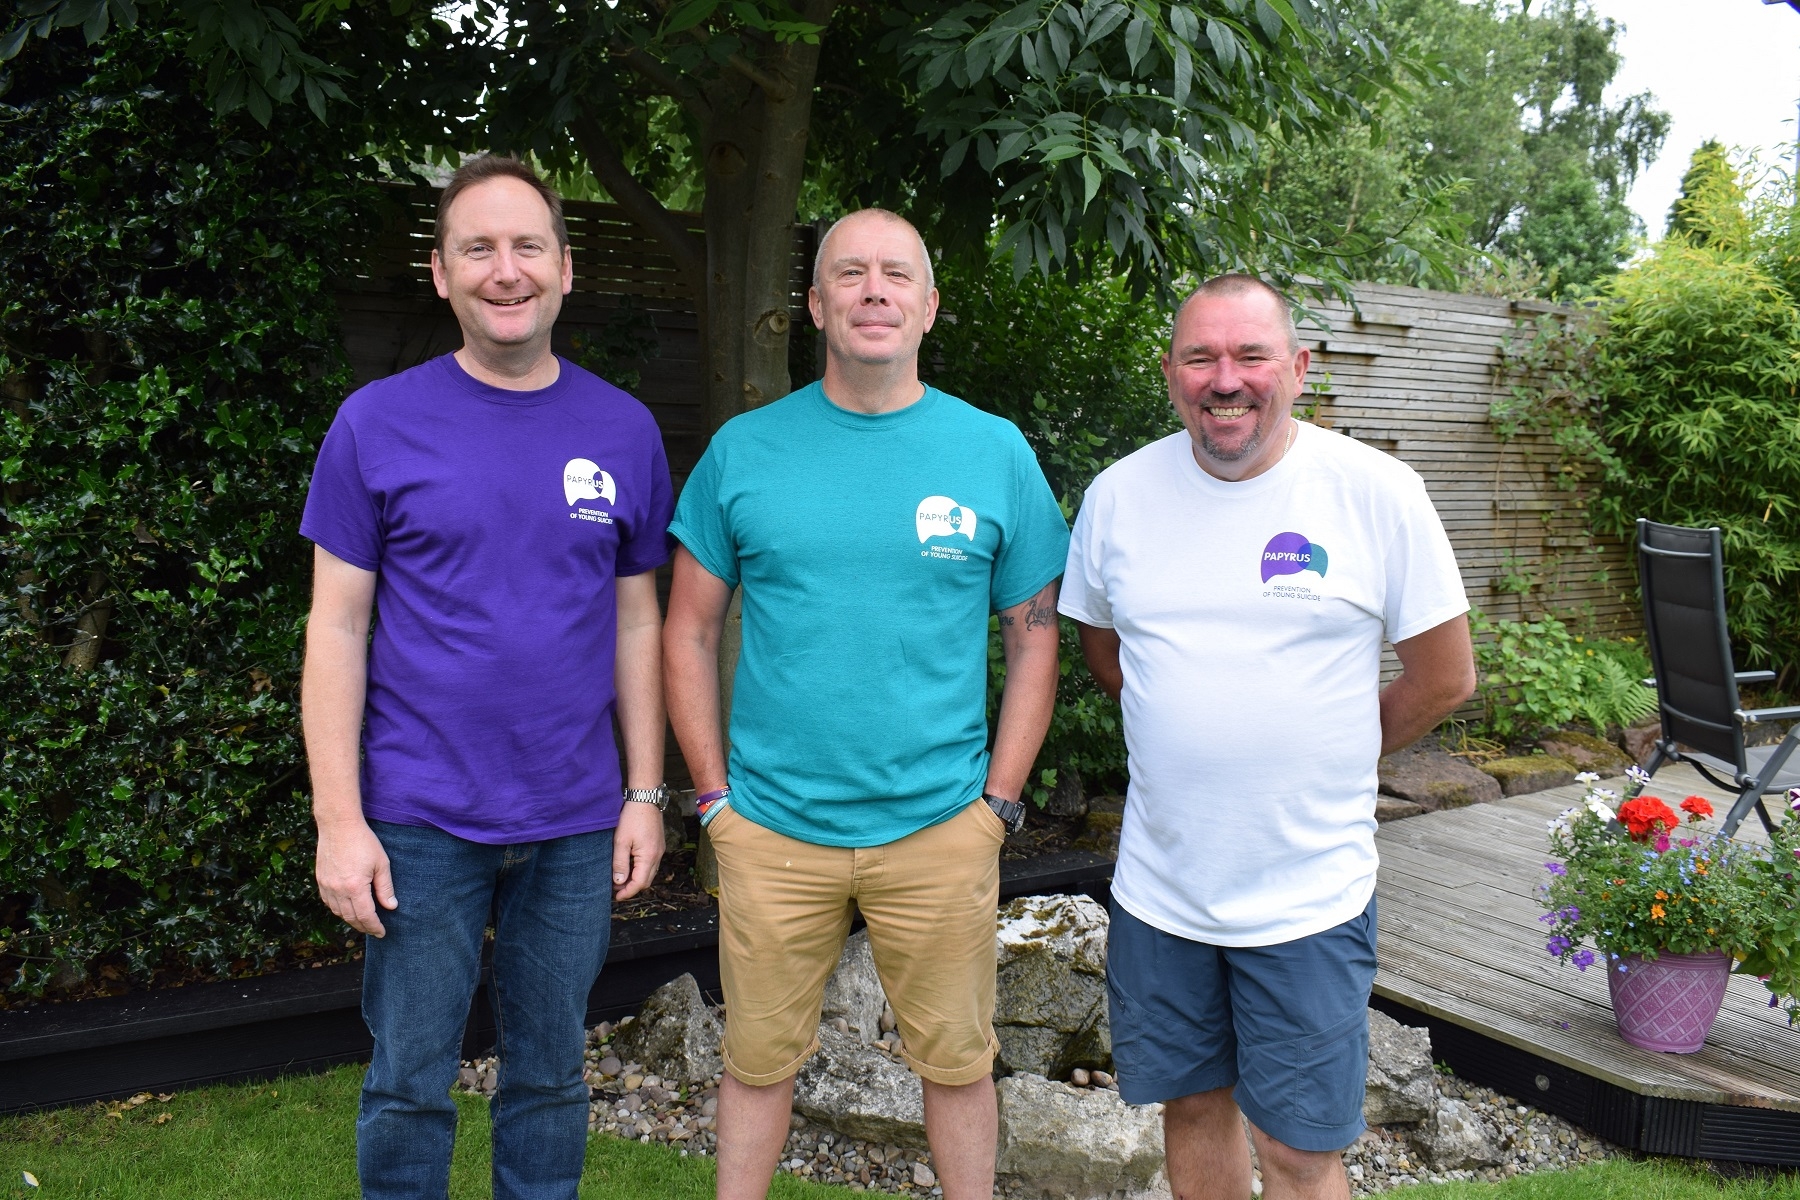 Image shows three dads smiling in a garden.